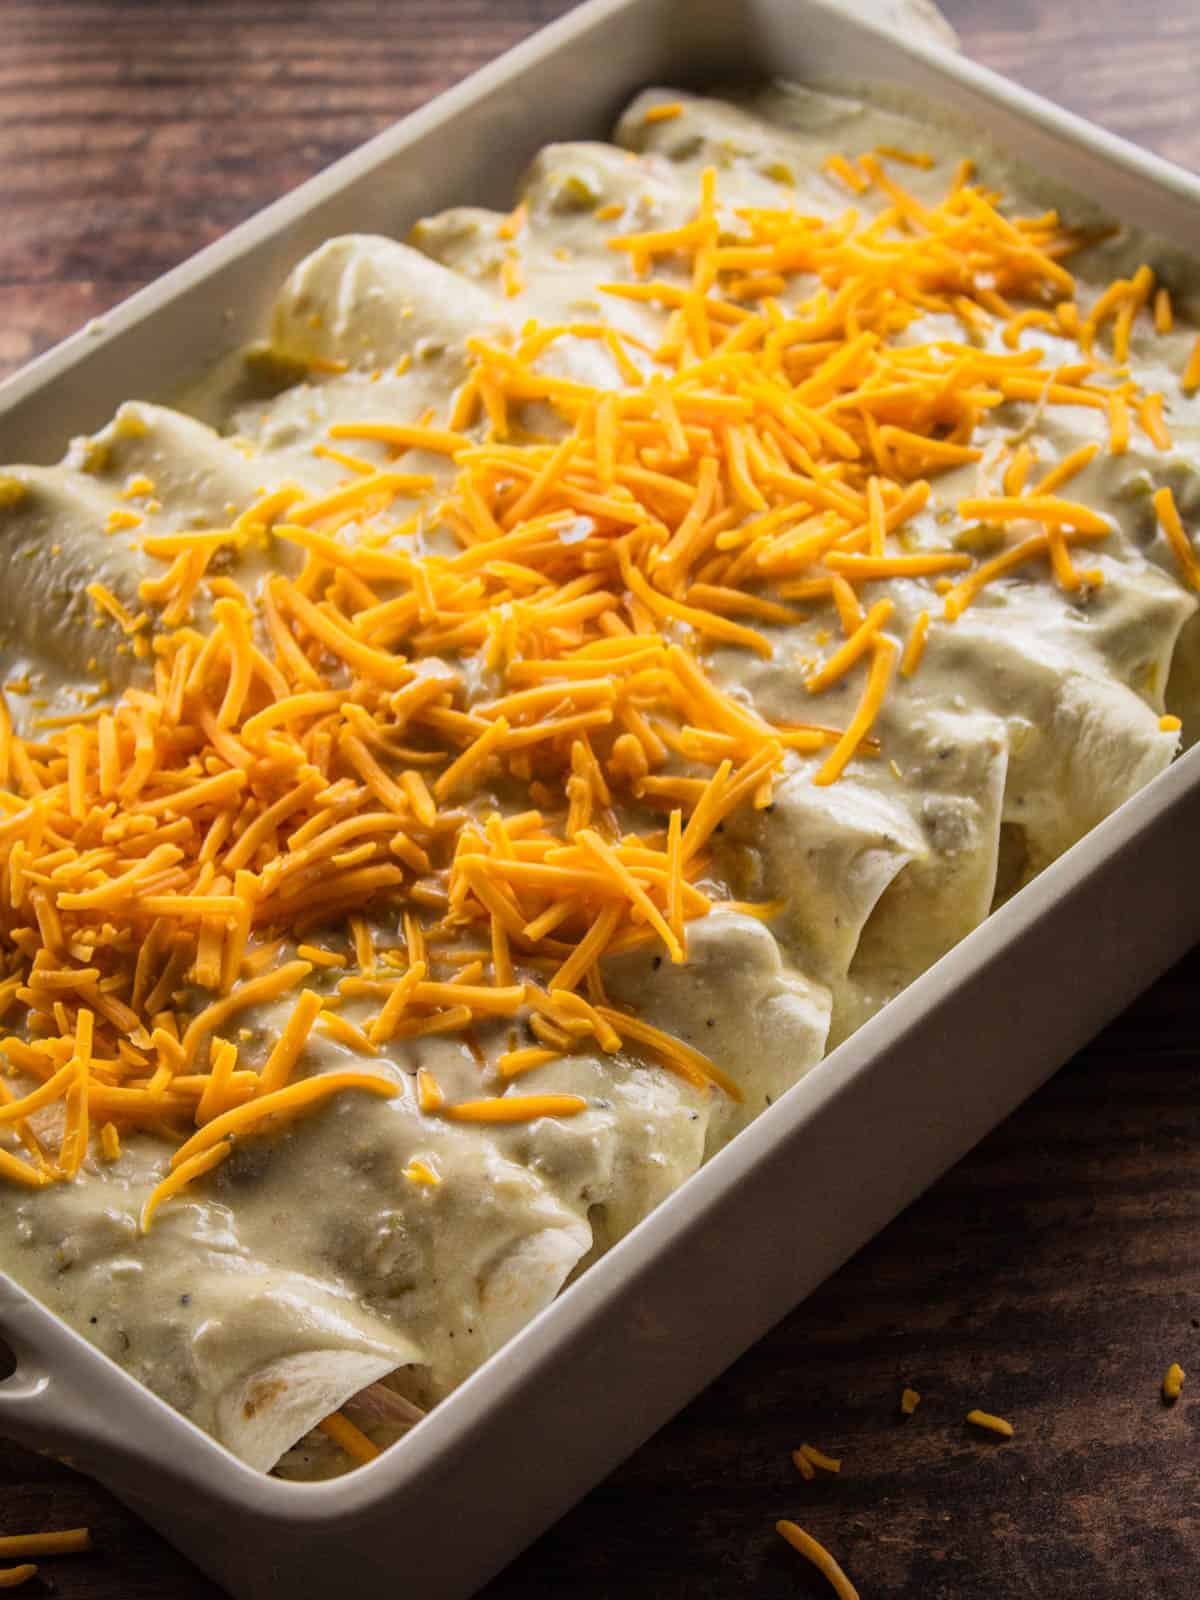 enchiladas topped with sauce and cheese before baking